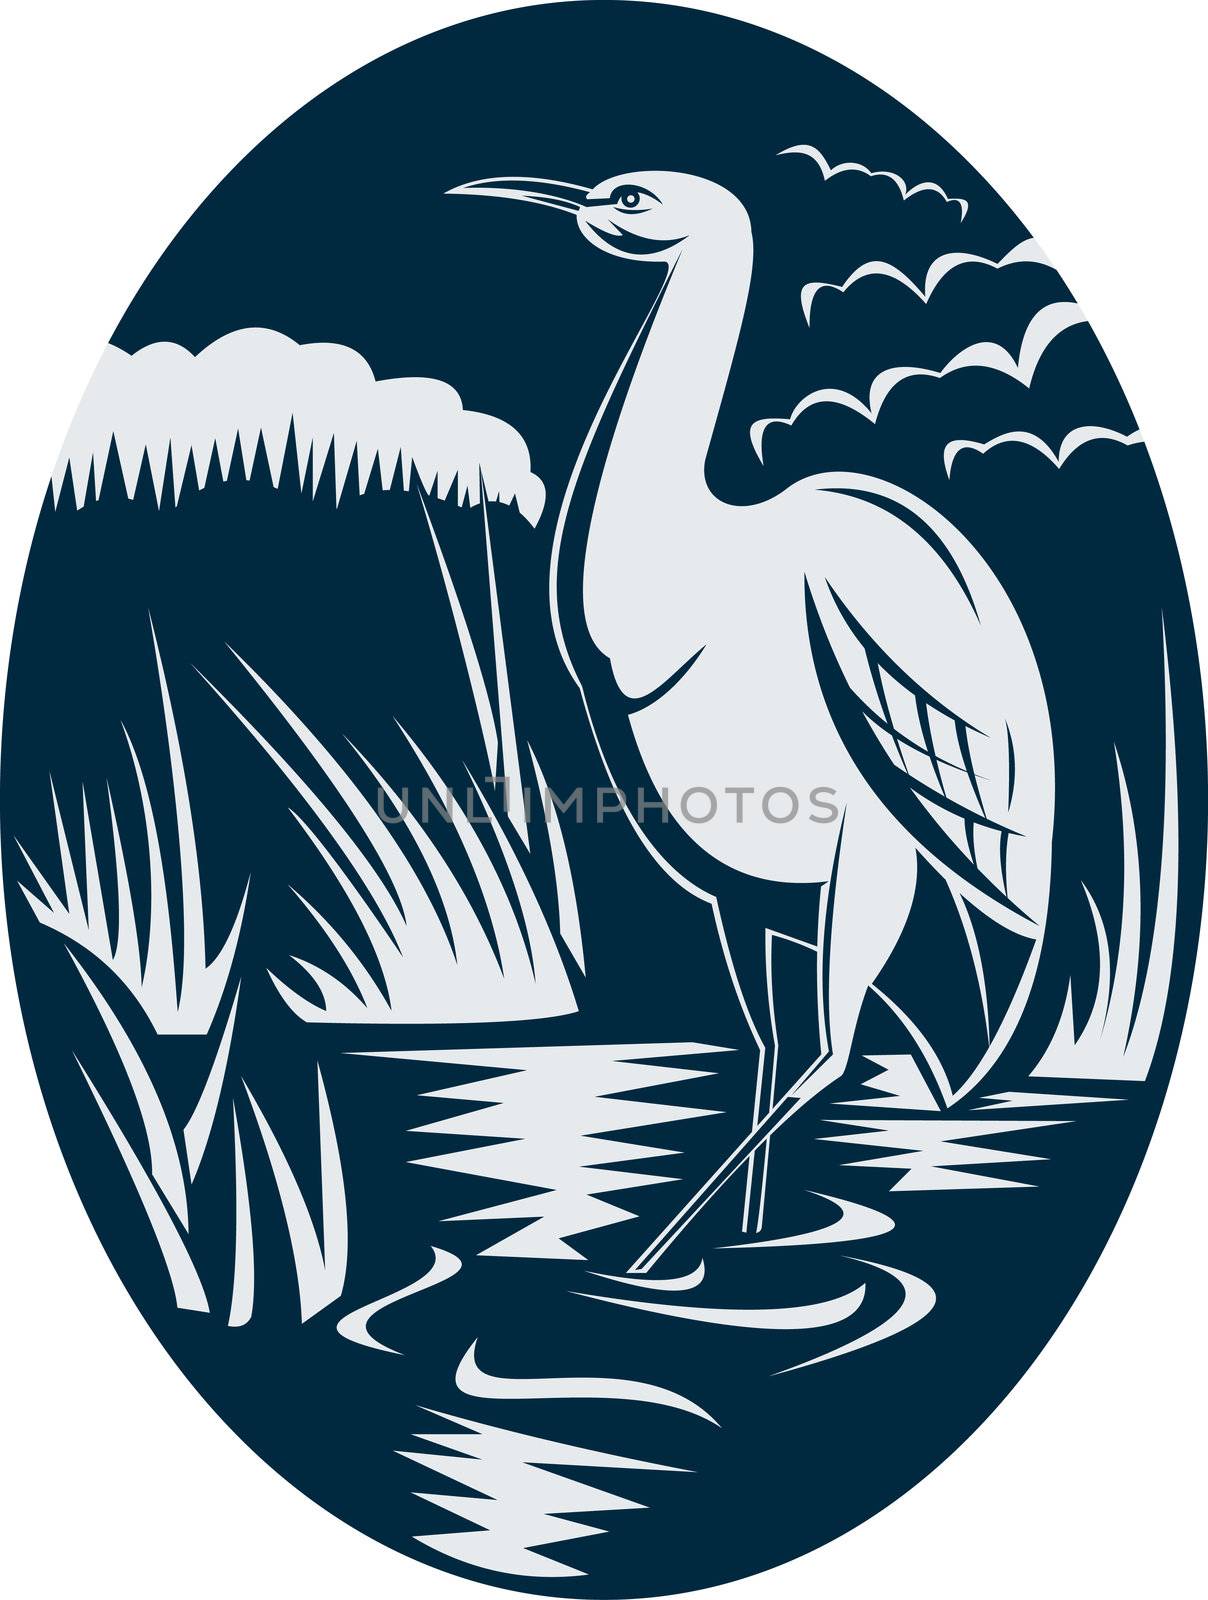 Heron wading in the marsh or swamp  by patrimonio